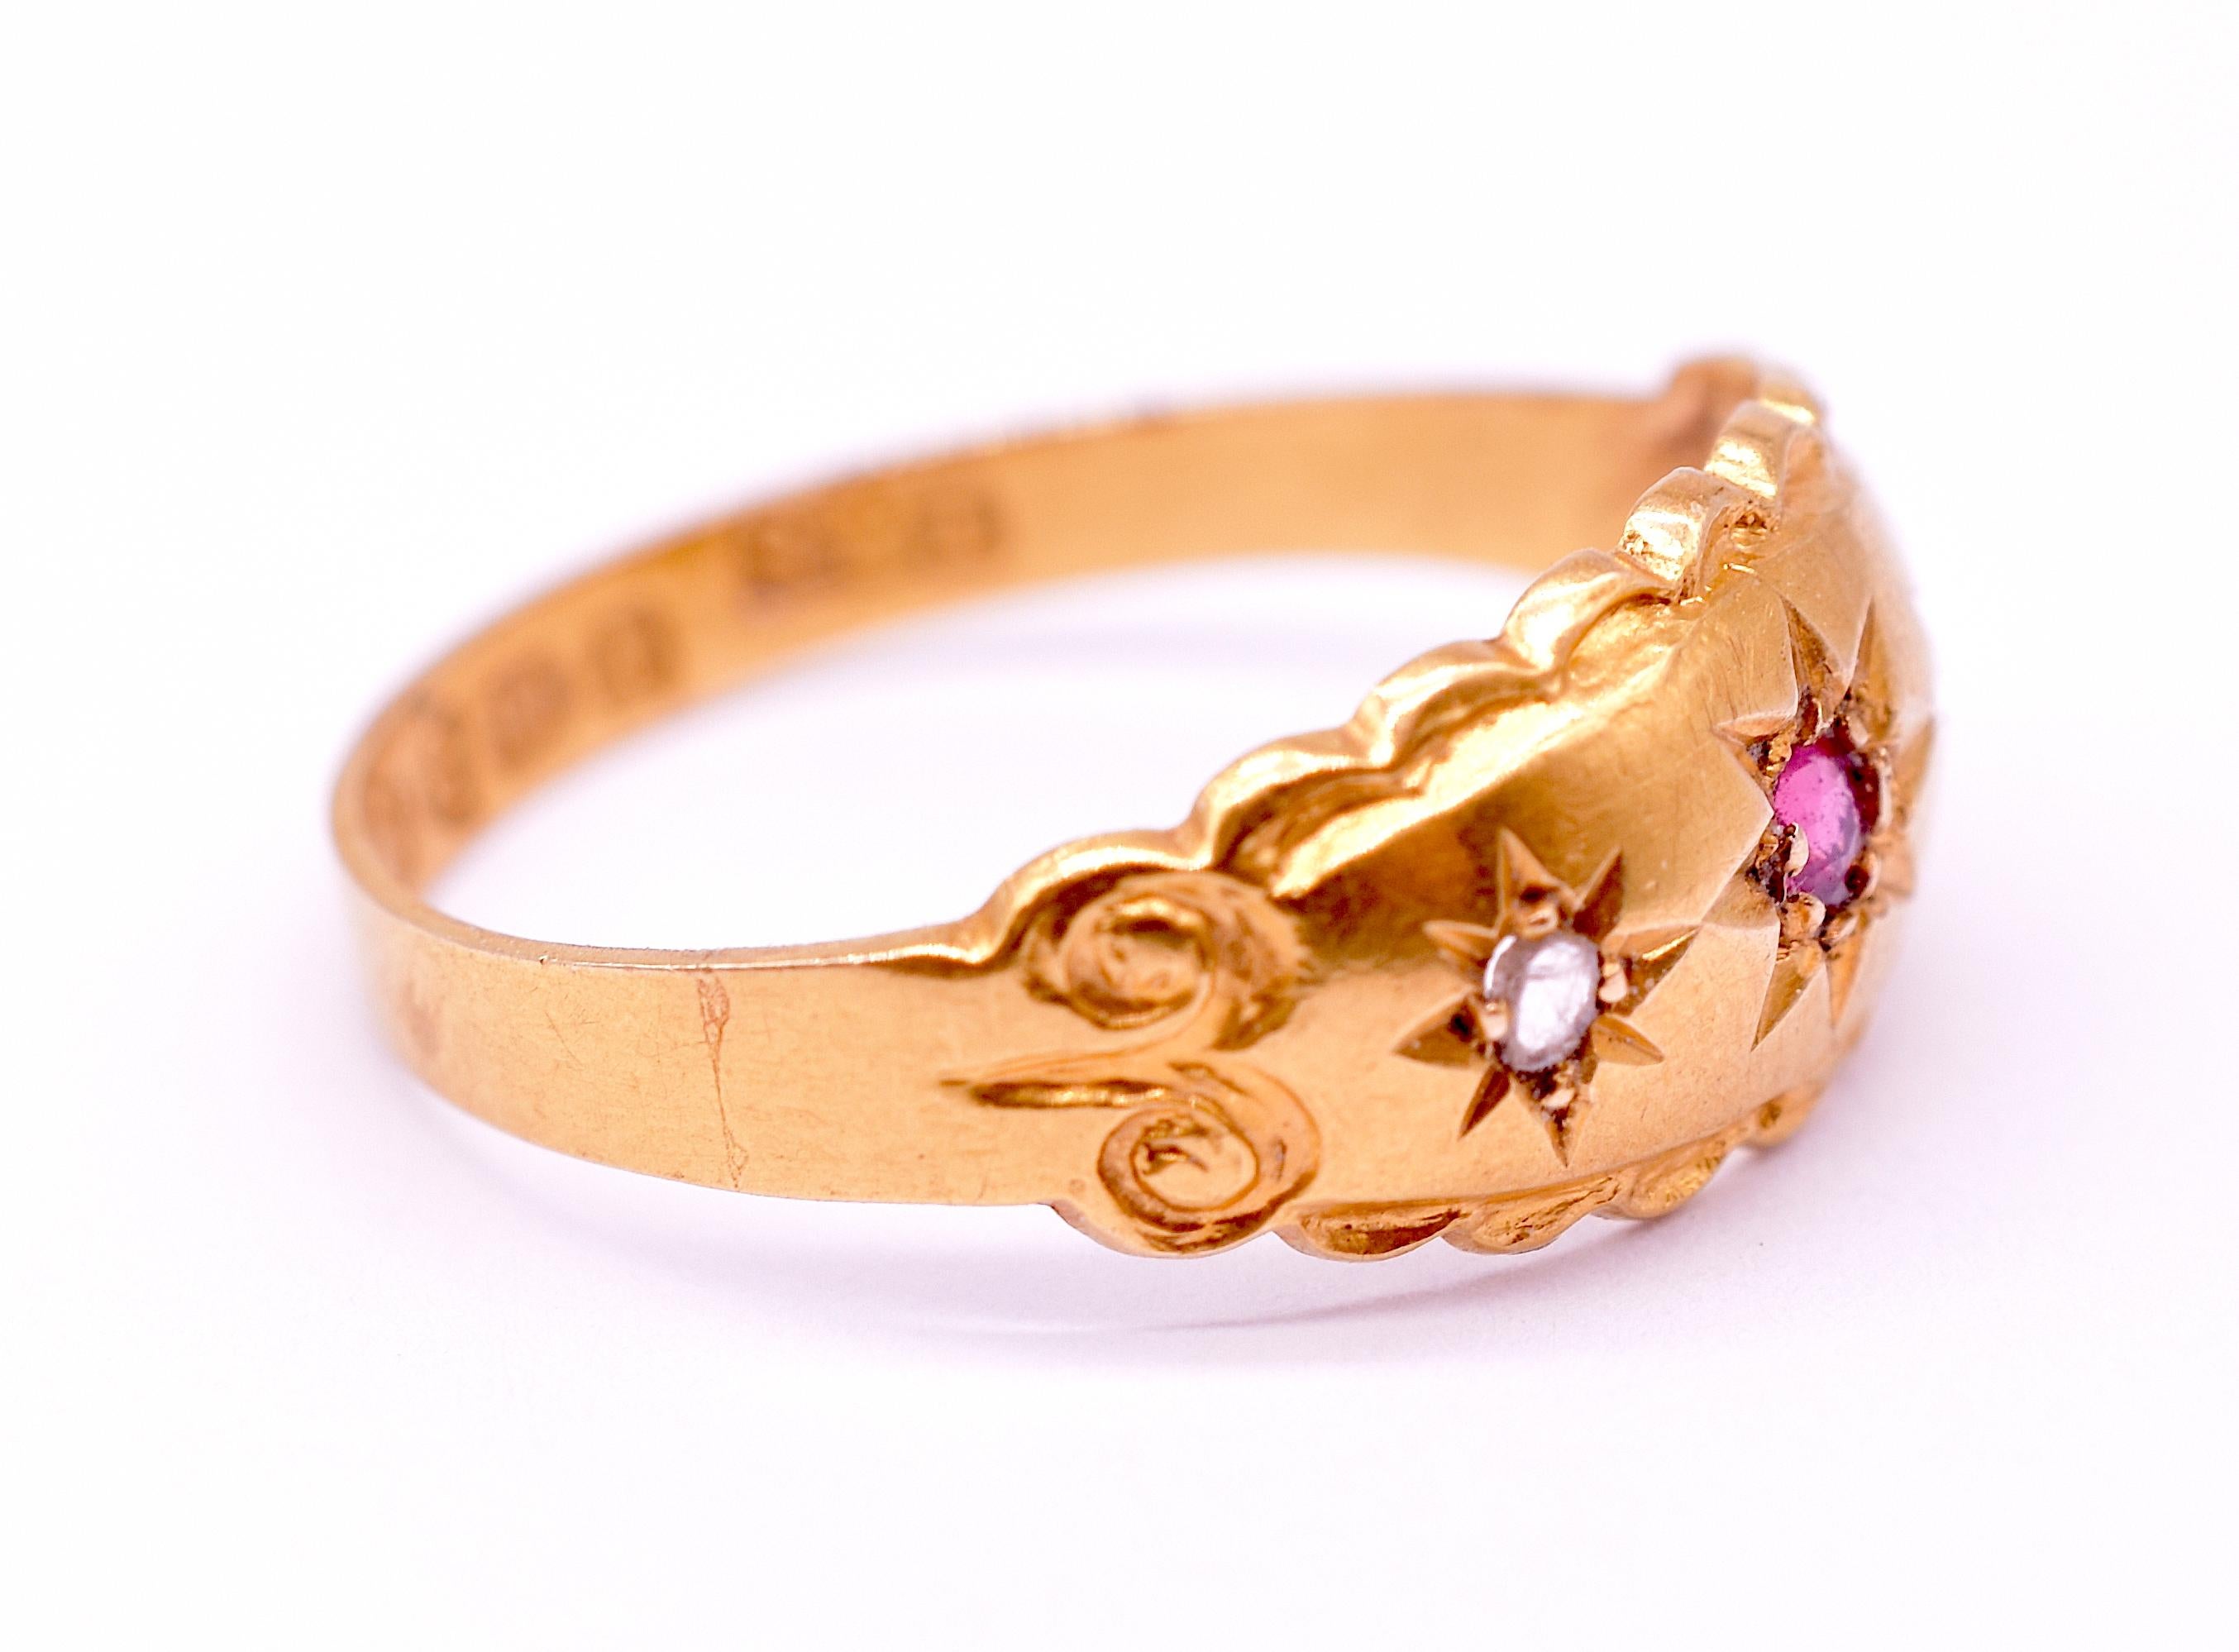 Women's 18K Star Ruby and Diamond Flush Mount Ring with Scalloped Gold Band, HM 1913